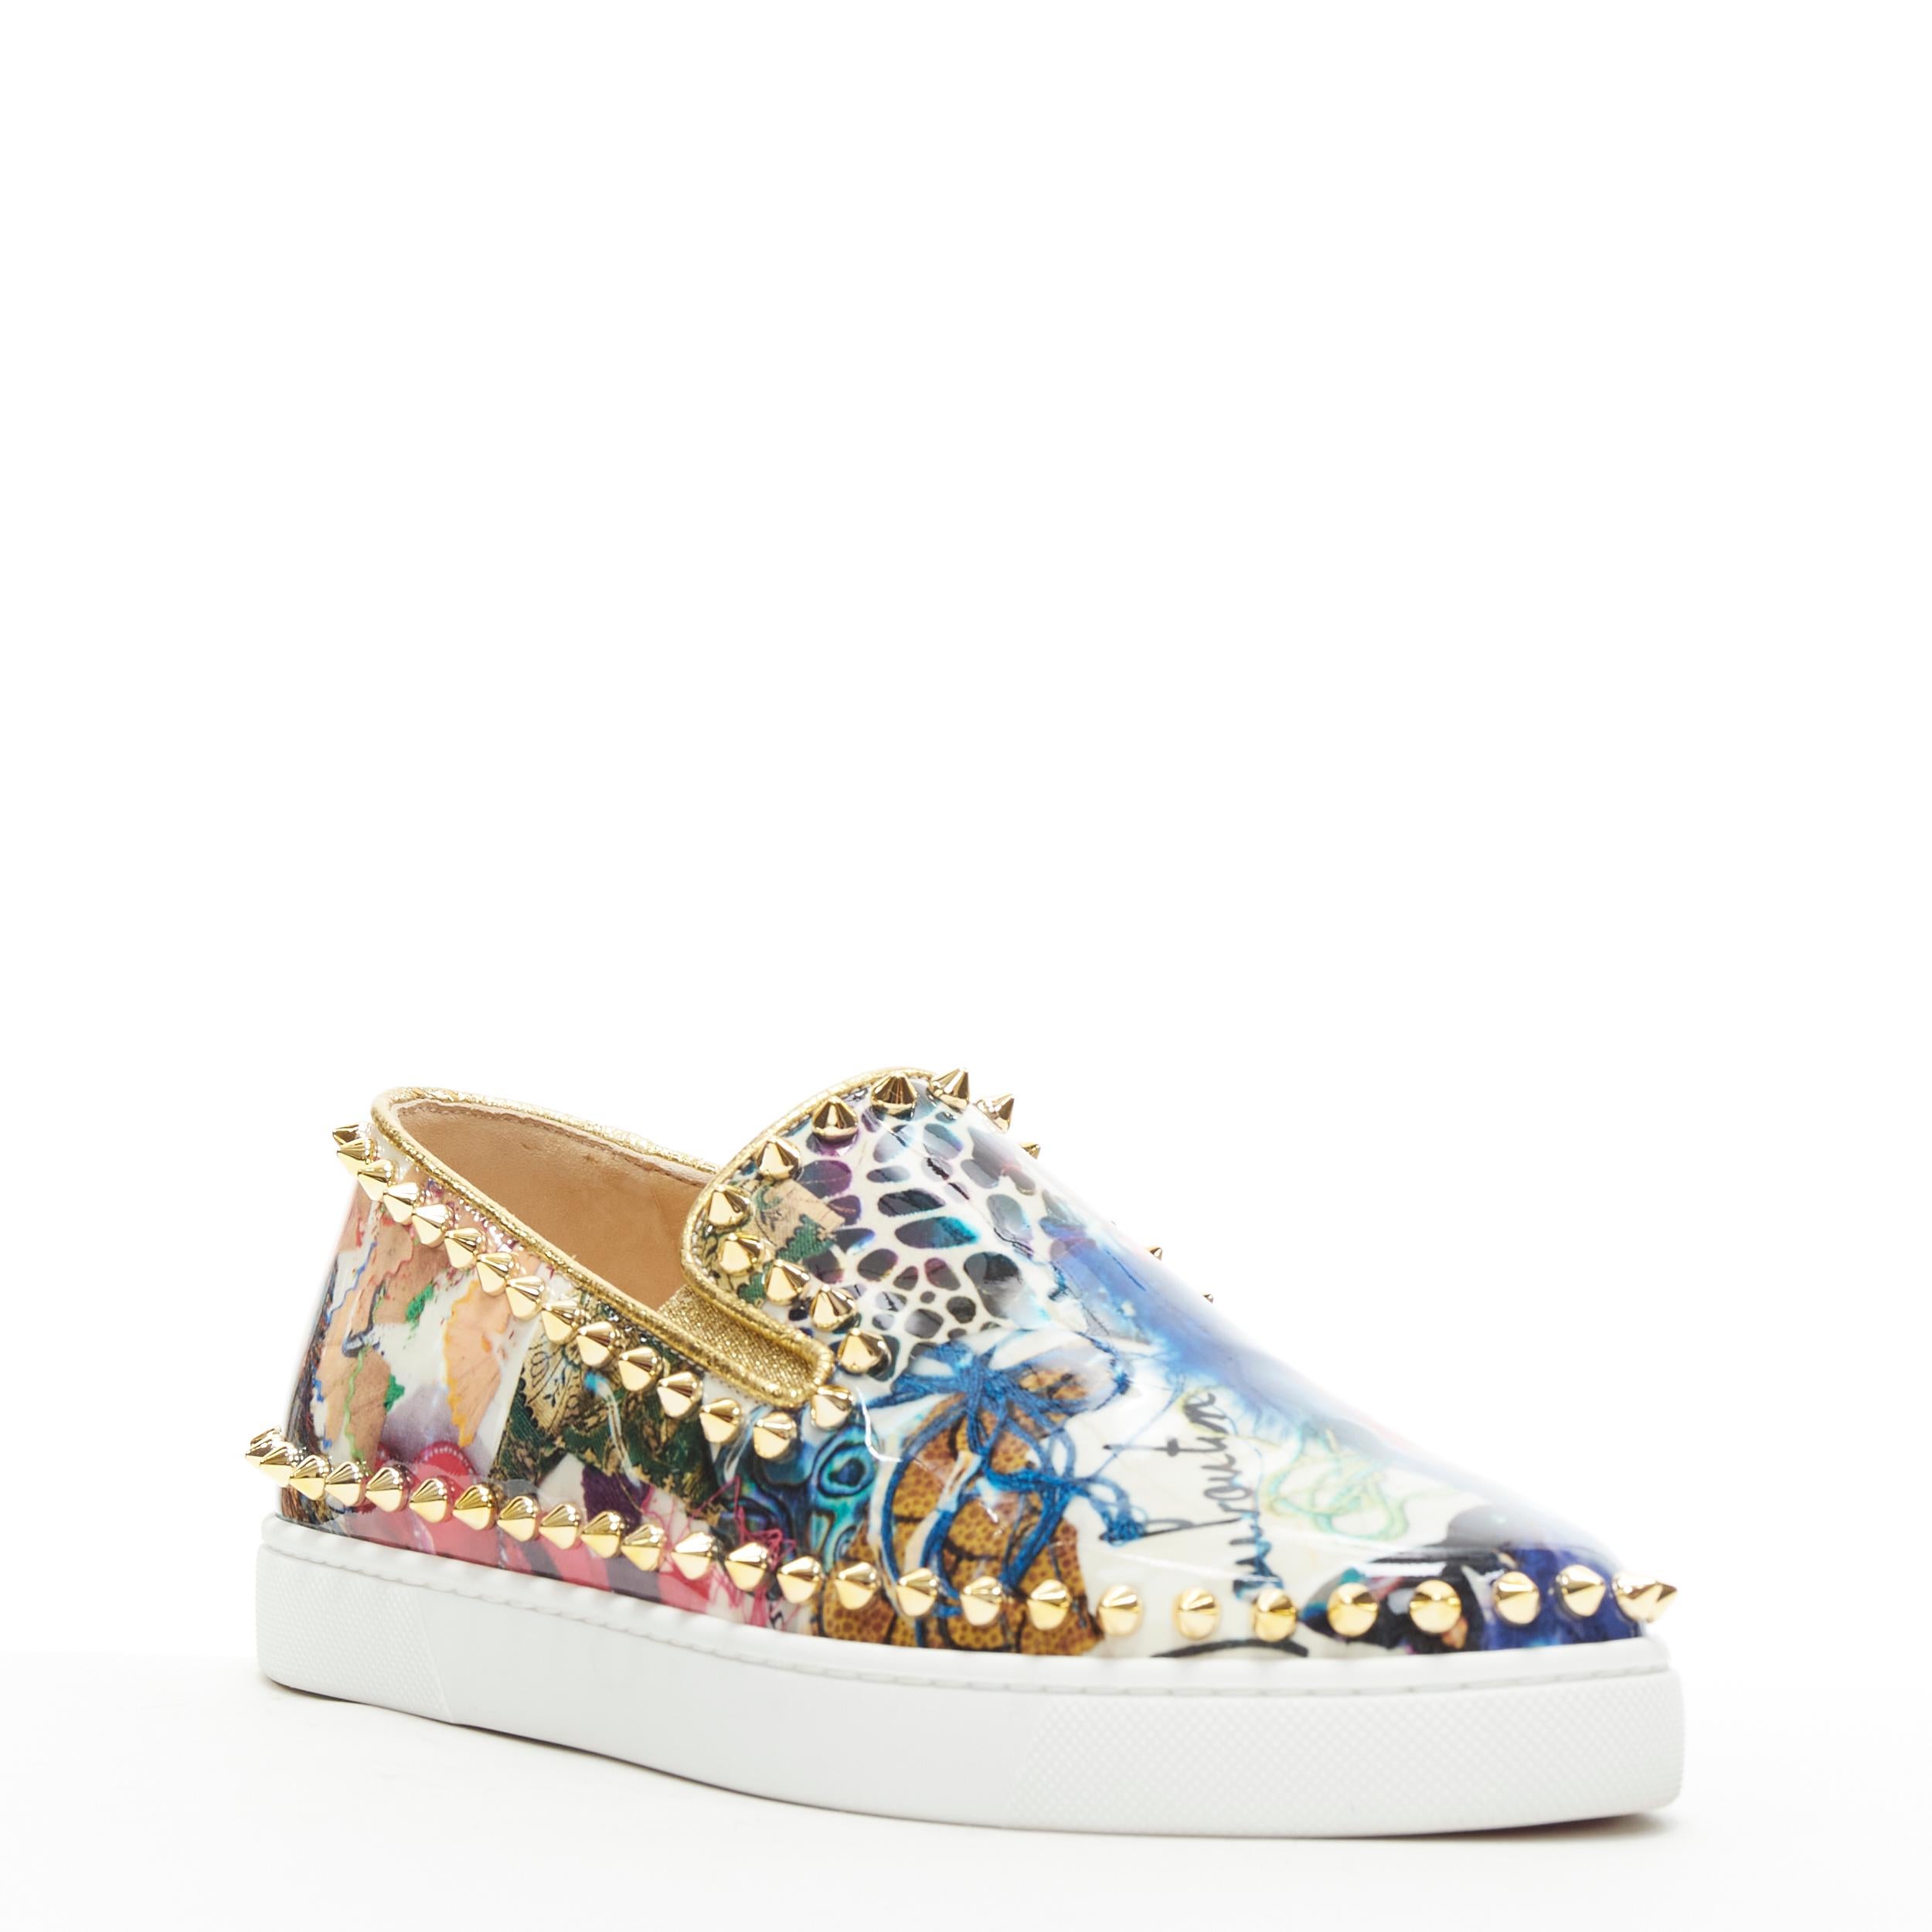 CHRISTIAN LOUBOUTIN Pik Boat abstract patent gold spike stud low sneaker EU37 
Reference: TGAS/B00799 
Brand: Christian Louboutin 
Designer: Christian Louboutin 
Model: Pik boat printed gold studs 
Material: Patent Leather 
Color: Multicolour